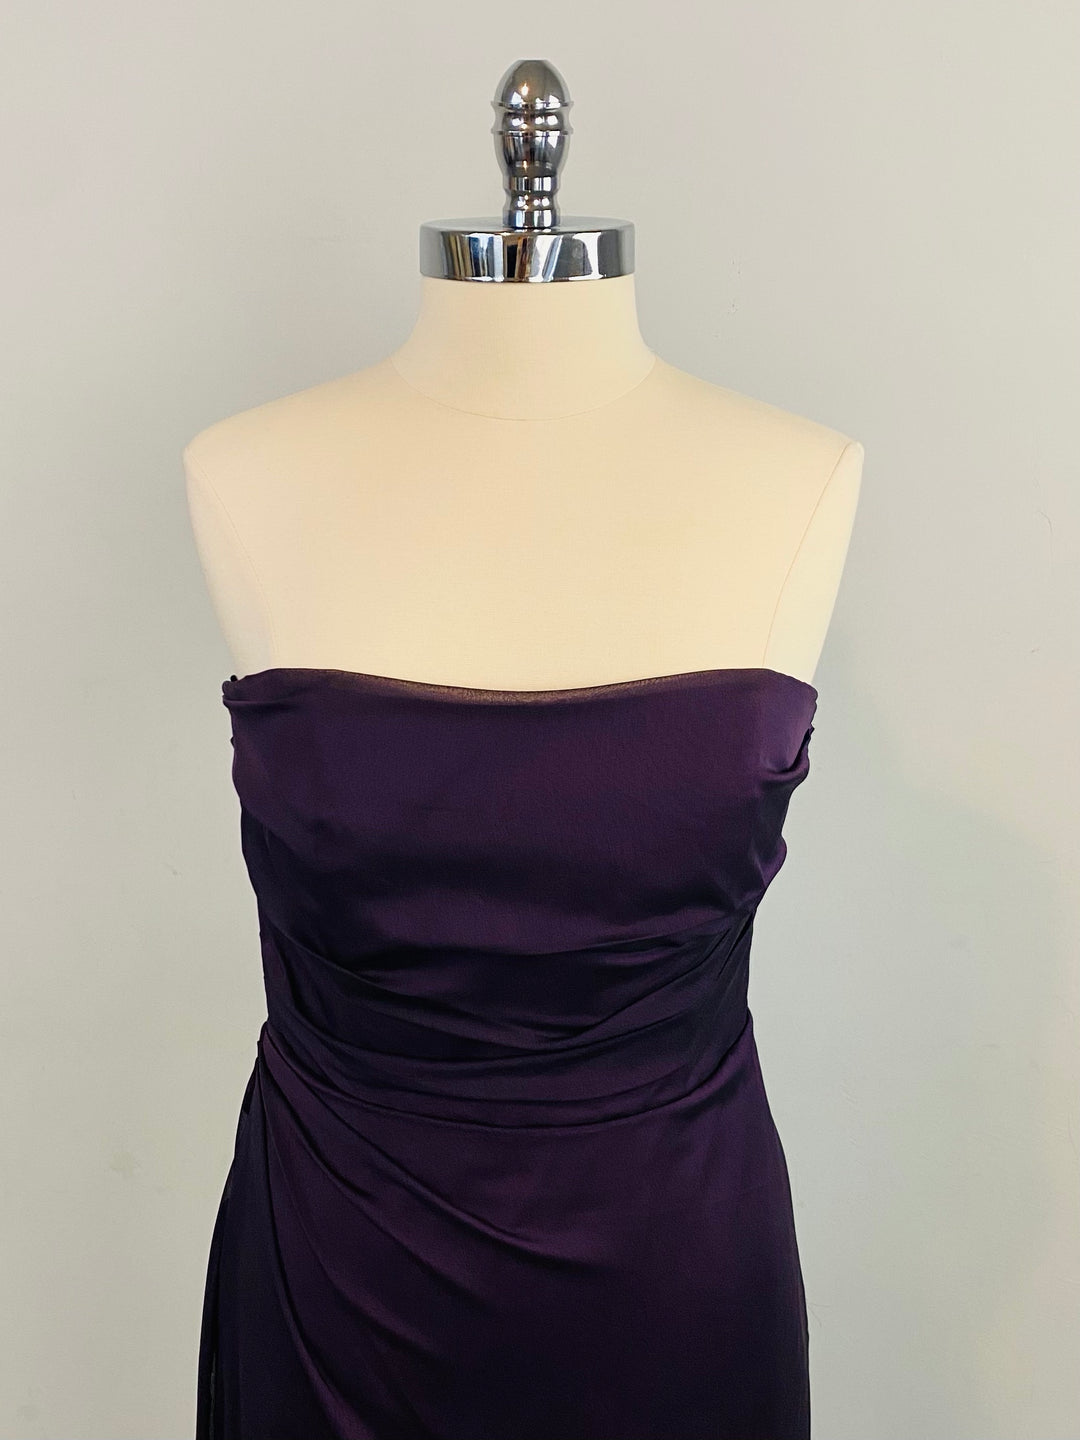 Occasions Plum Chiffon Gown Size 10